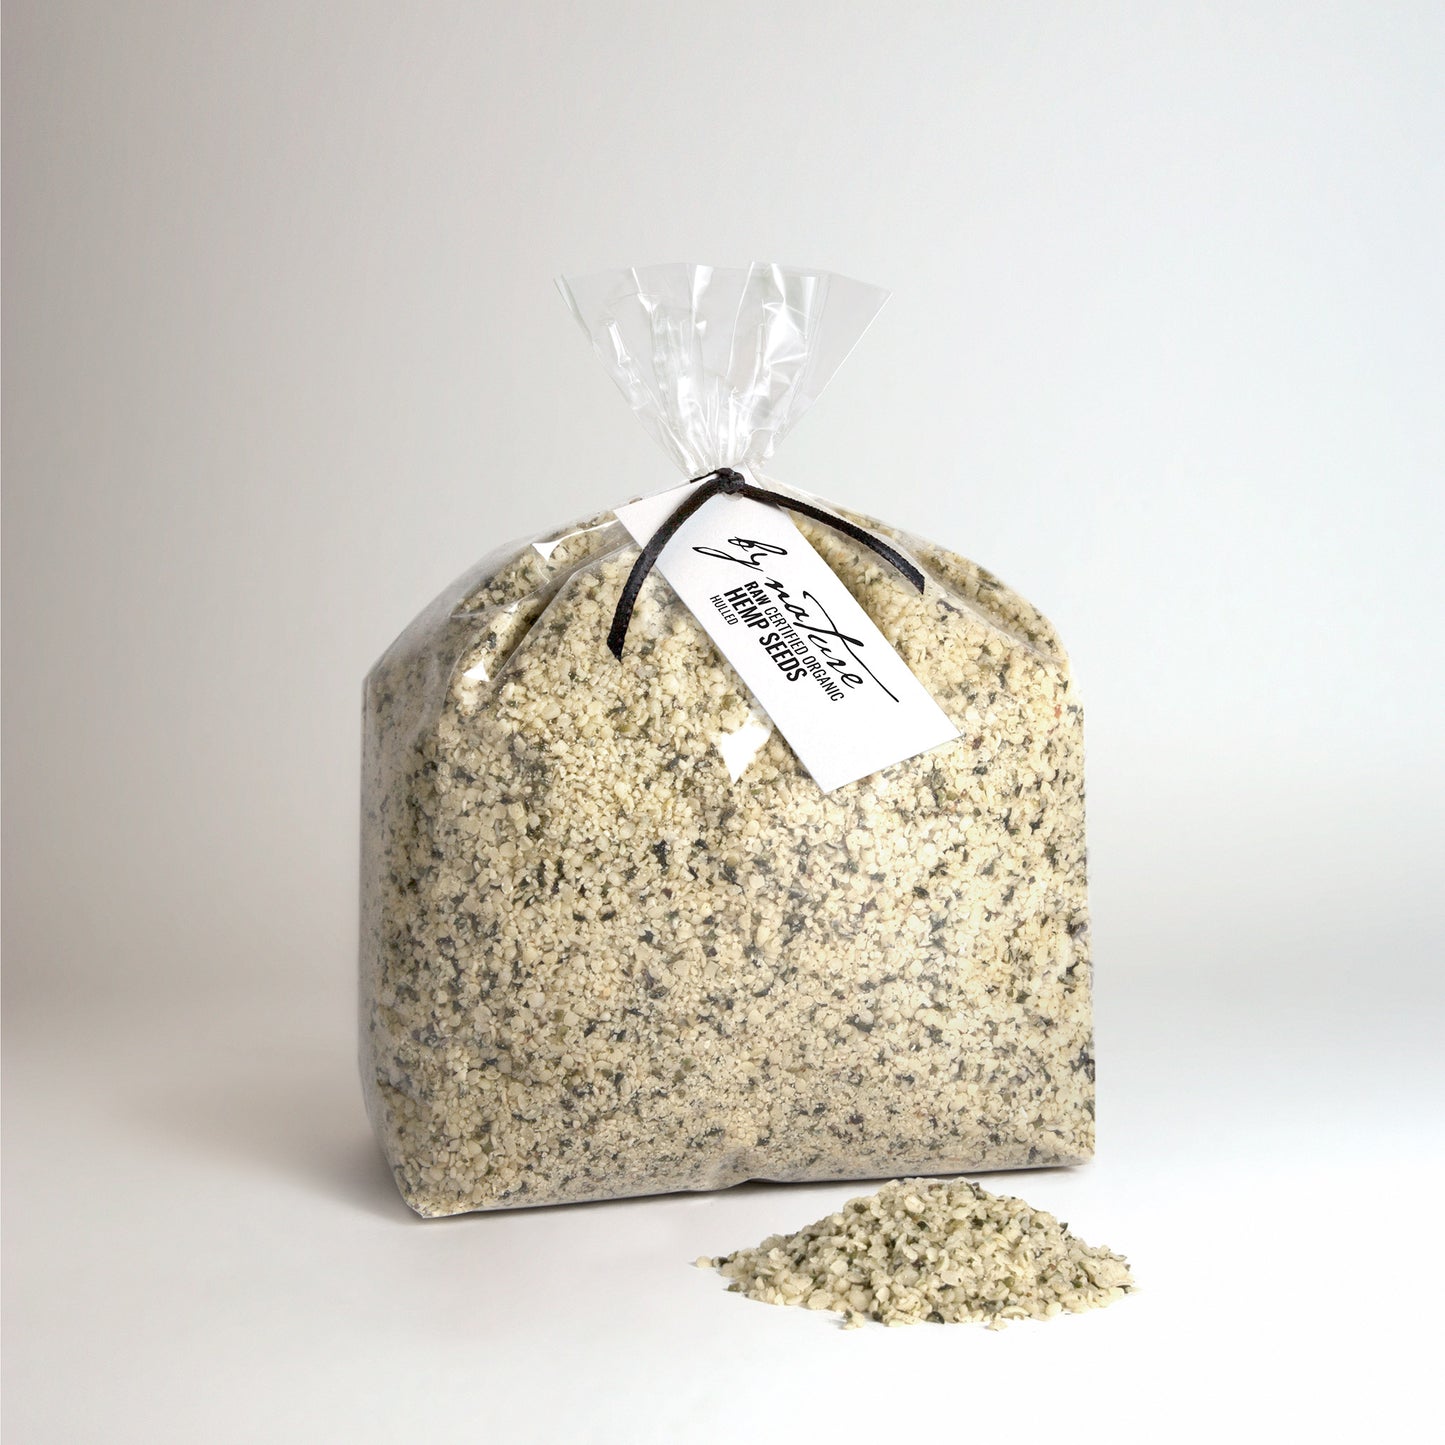 BY NATURE Hemp Seeds, 1kg - hulled, raw, certified organic at source.